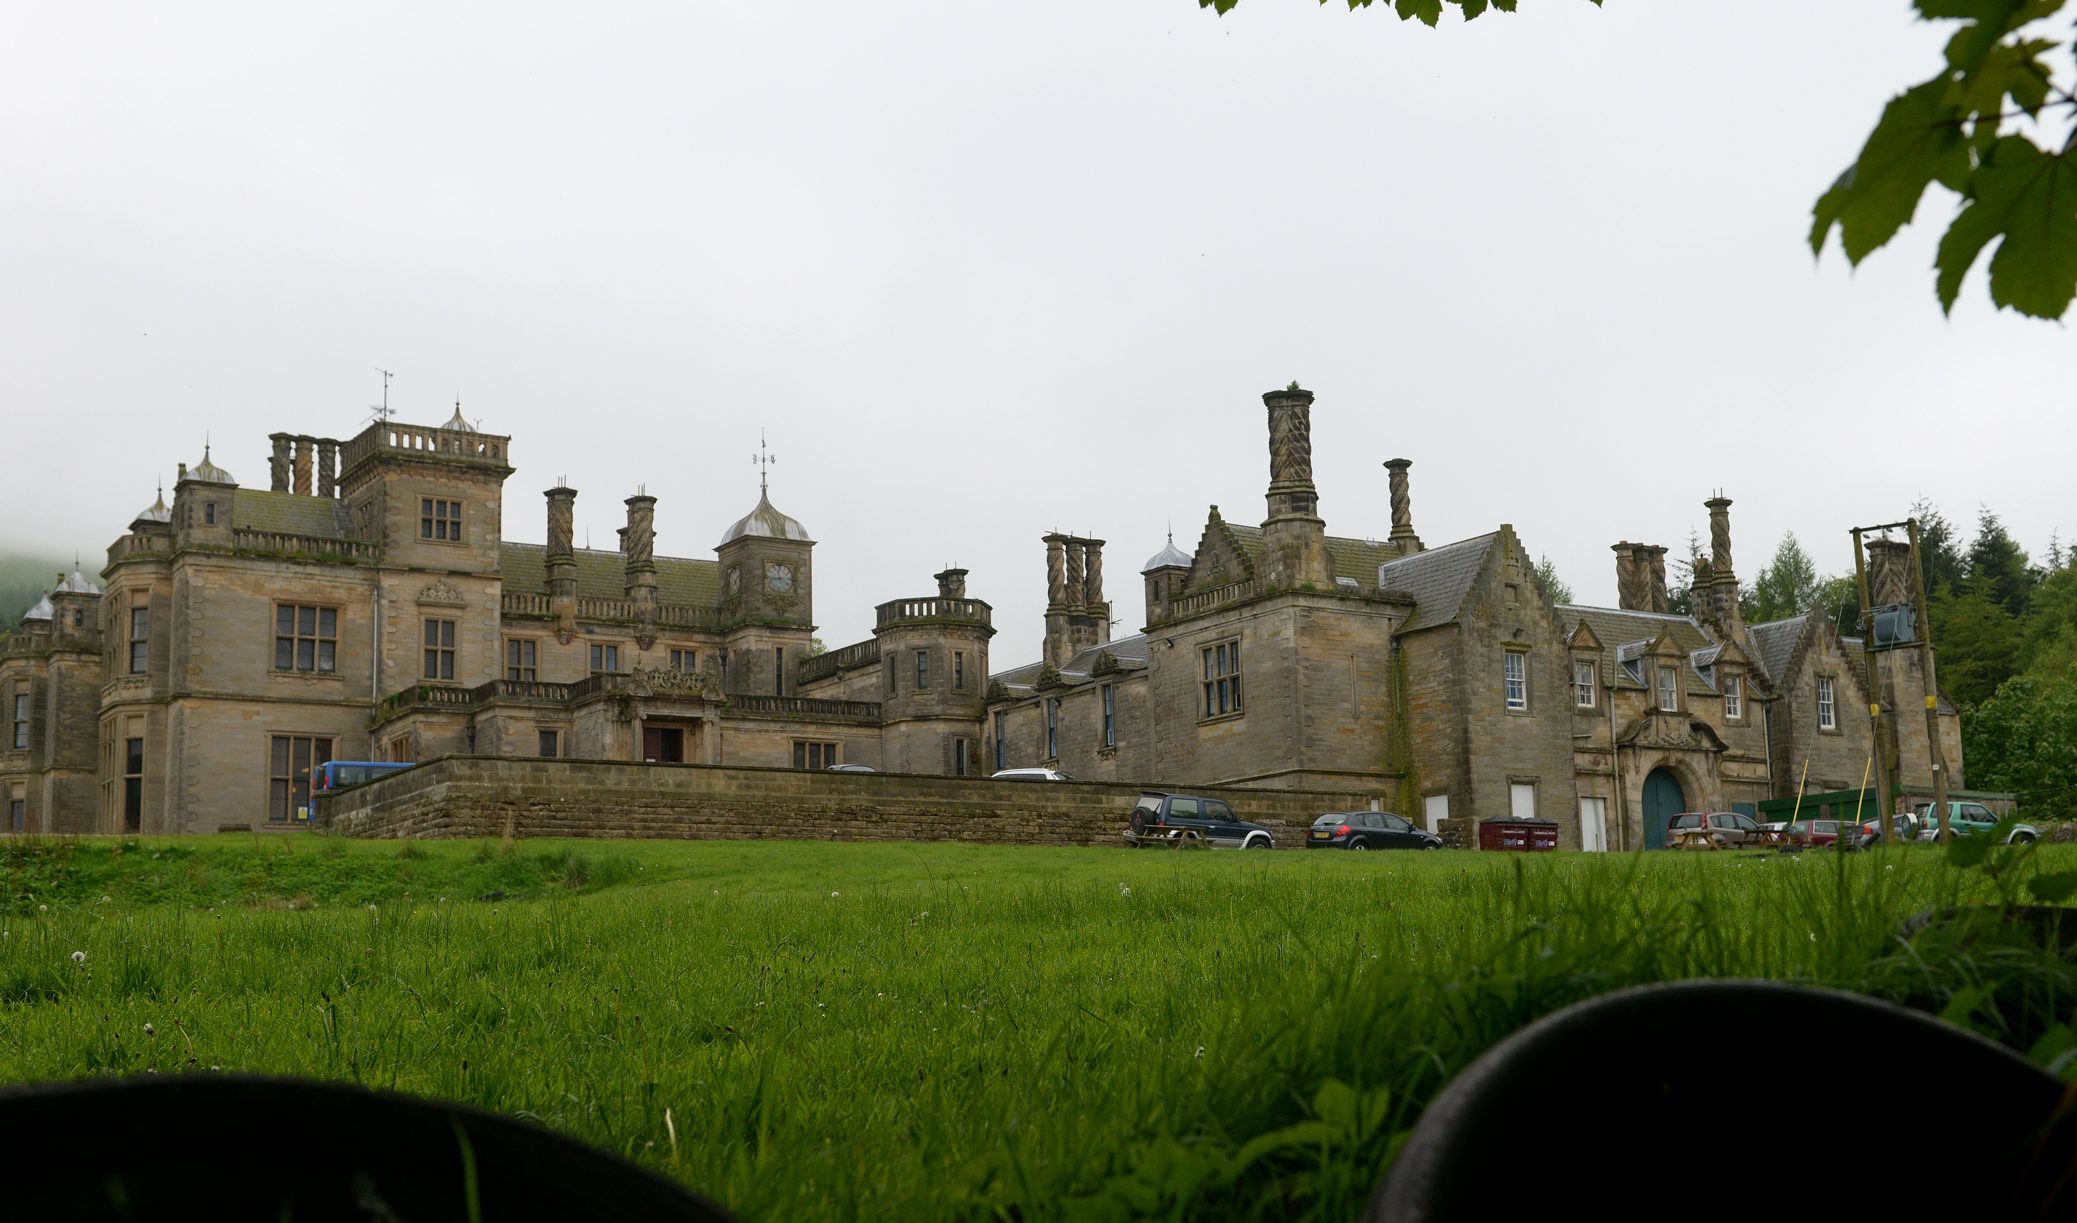 The former St Ninian's School in Falkland.